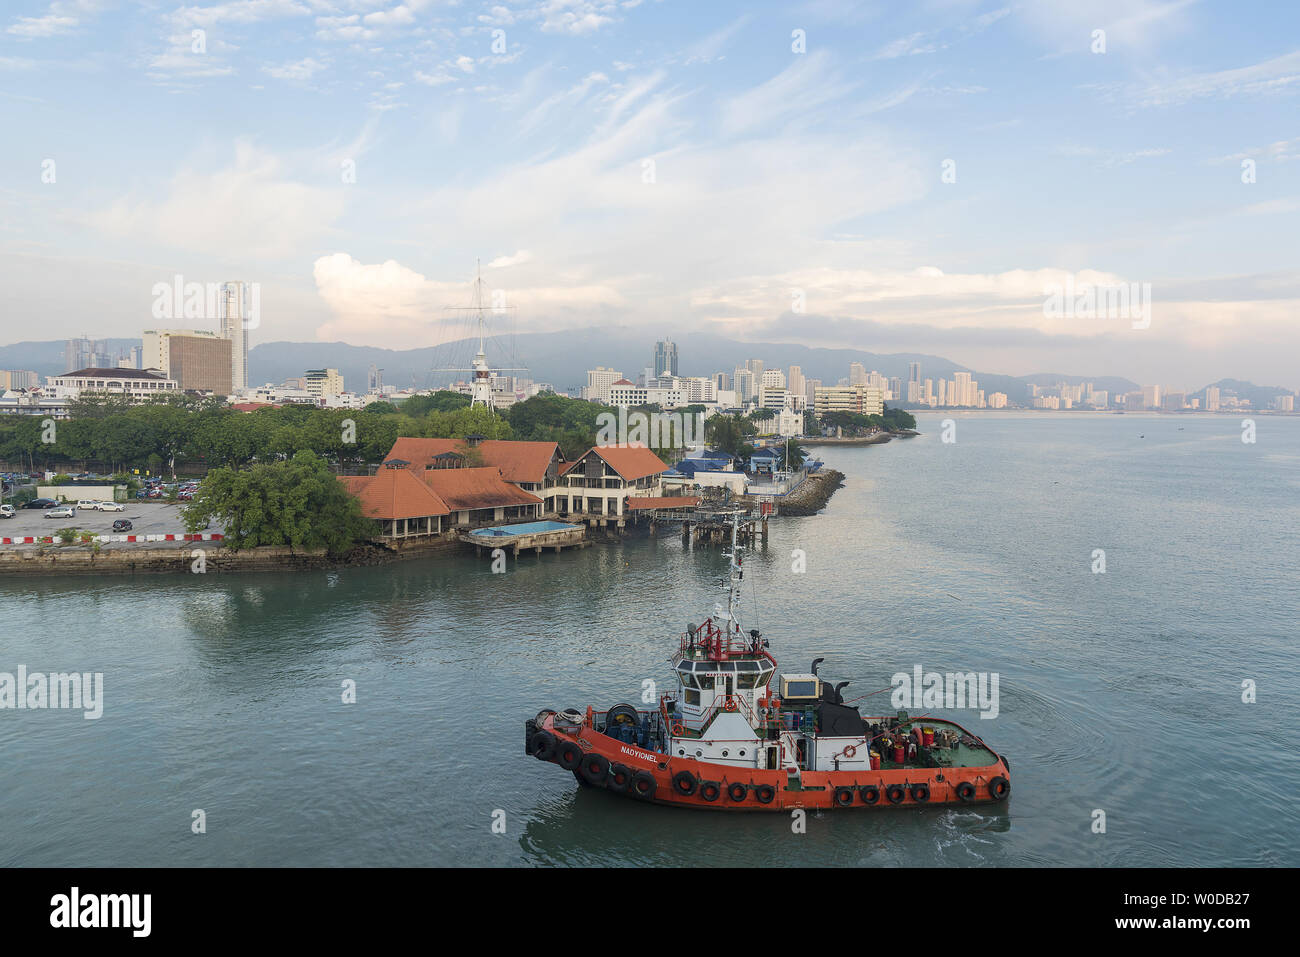 PENANG, MALAYSIA,   Port of Penang, Asia,  Pulau Pinang, George Town, City skyline with harbour tug boat approaching dock. Stock Photo